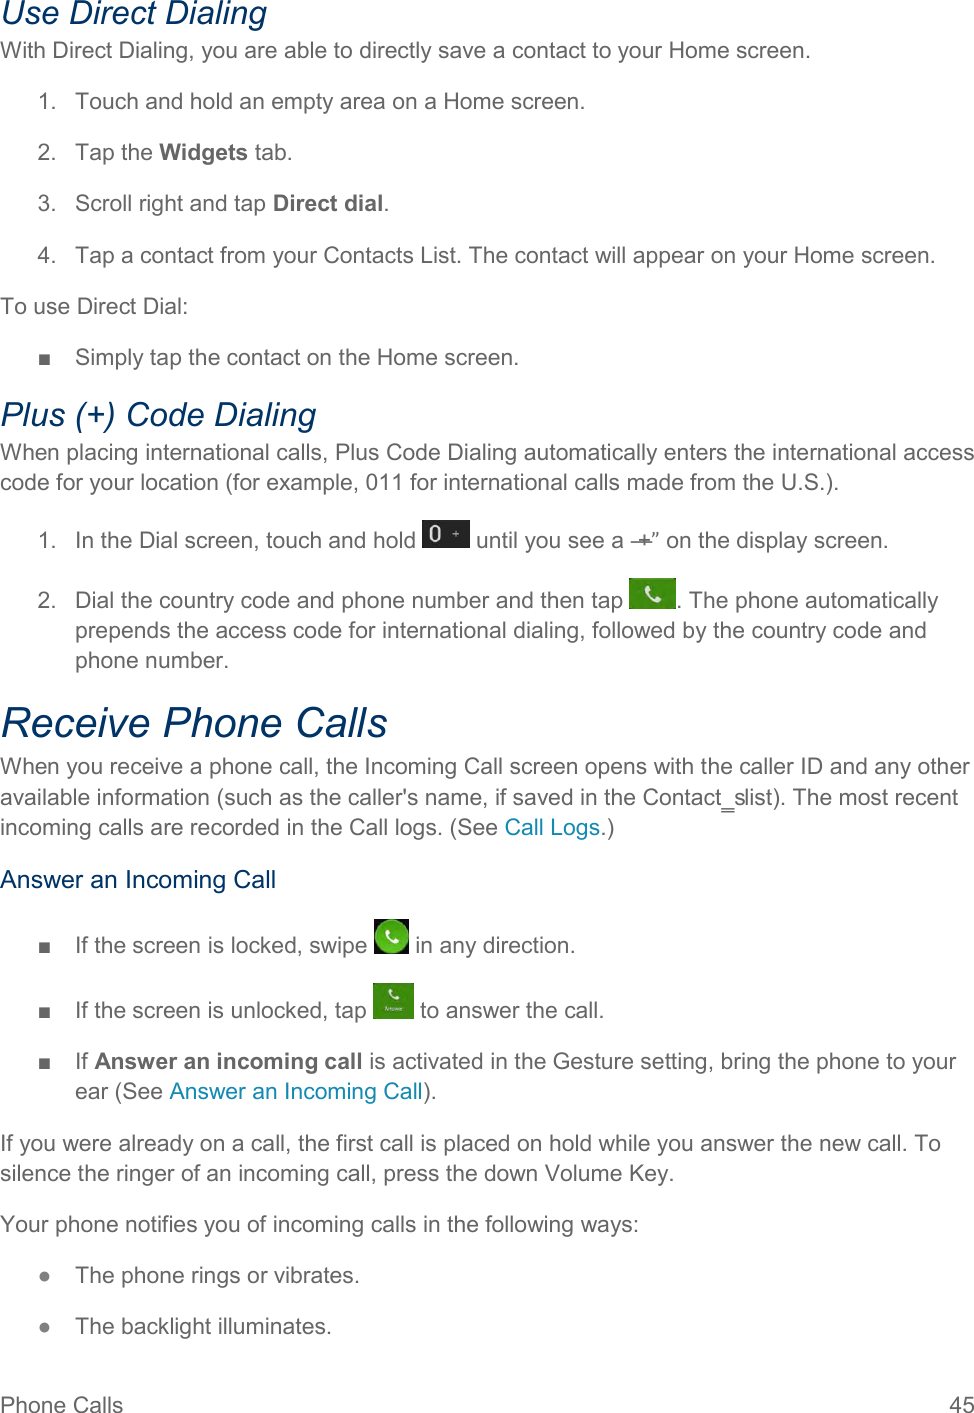 Phone Calls  45 Use Direct Dialing With Direct Dialing, you are able to directly save a contact to your Home screen. 1.  Touch and hold an empty area on a Home screen. 2.  Tap the Widgets tab. 3.  Scroll right and tap Direct dial. 4.  Tap a contact from your Contacts List. The contact will appear on your Home screen. To use Direct Dial: ■  Simply tap the contact on the Home screen. Plus (+) Code Dialing When placing international calls, Plus Code Dialing automatically enters the international access code for your location (for example, 011 for international calls made from the U.S.). 1.  In the Dial screen, touch and hold   until you see a ―+” on the display screen. 2.  Dial the country code and phone number and then tap  . The phone automatically prepends the access code for international dialing, followed by the country code and phone number. Receive Phone Calls When you receive a phone call, the Incoming Call screen opens with the caller ID and any other available information (such as the caller&apos;s name, if saved in the Contact‗s list). The most recent incoming calls are recorded in the Call logs. (See Call Logs.) Answer an Incoming Call ■  If the screen is locked, swipe   in any direction. ■  If the screen is unlocked, tap   to answer the call. ■  If Answer an incoming call is activated in the Gesture setting, bring the phone to your ear (See Answer an Incoming Call). If you were already on a call, the first call is placed on hold while you answer the new call. To silence the ringer of an incoming call, press the down Volume Key. Your phone notifies you of incoming calls in the following ways: ●  The phone rings or vibrates. ●  The backlight illuminates. 